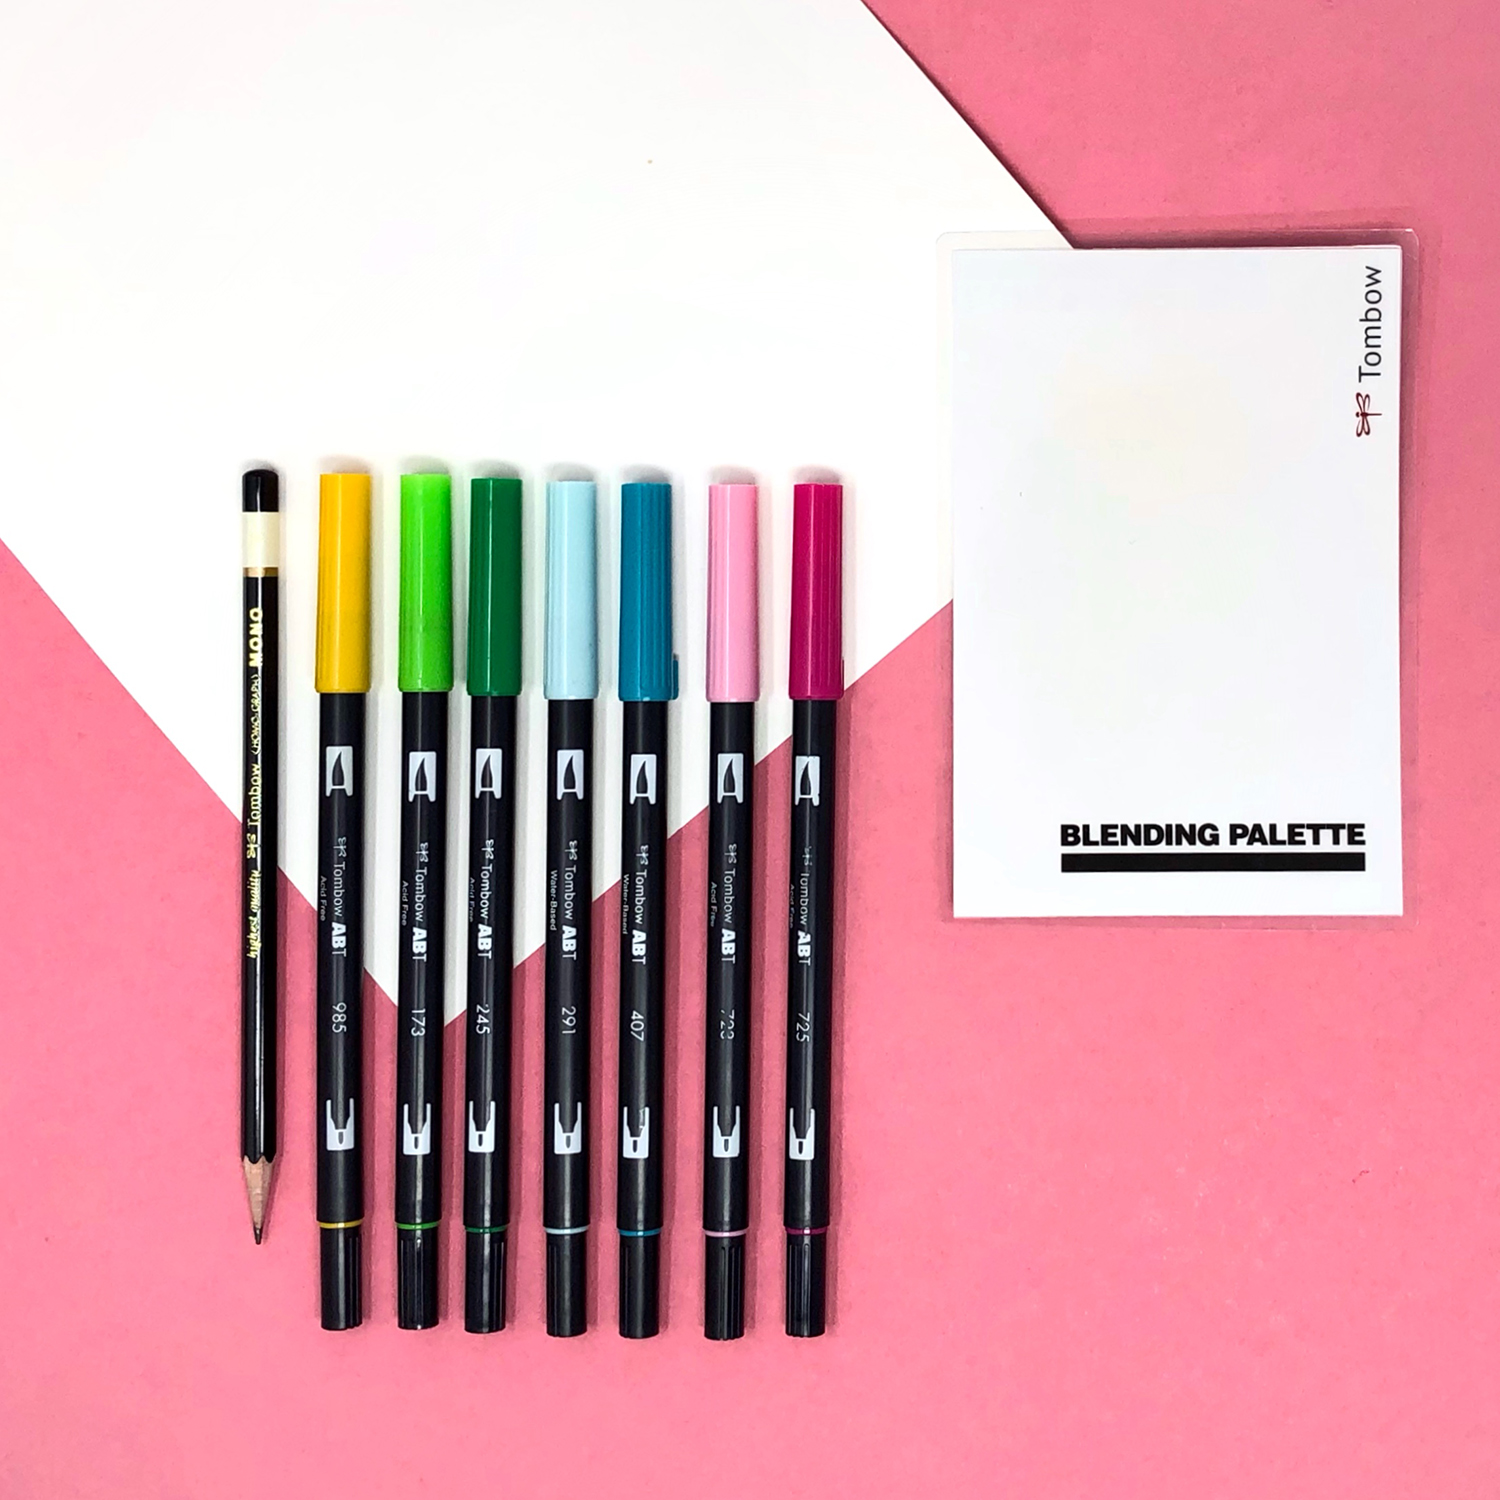 Tombow Brush Lettering Tutorial: How to Blend Tombow Markers